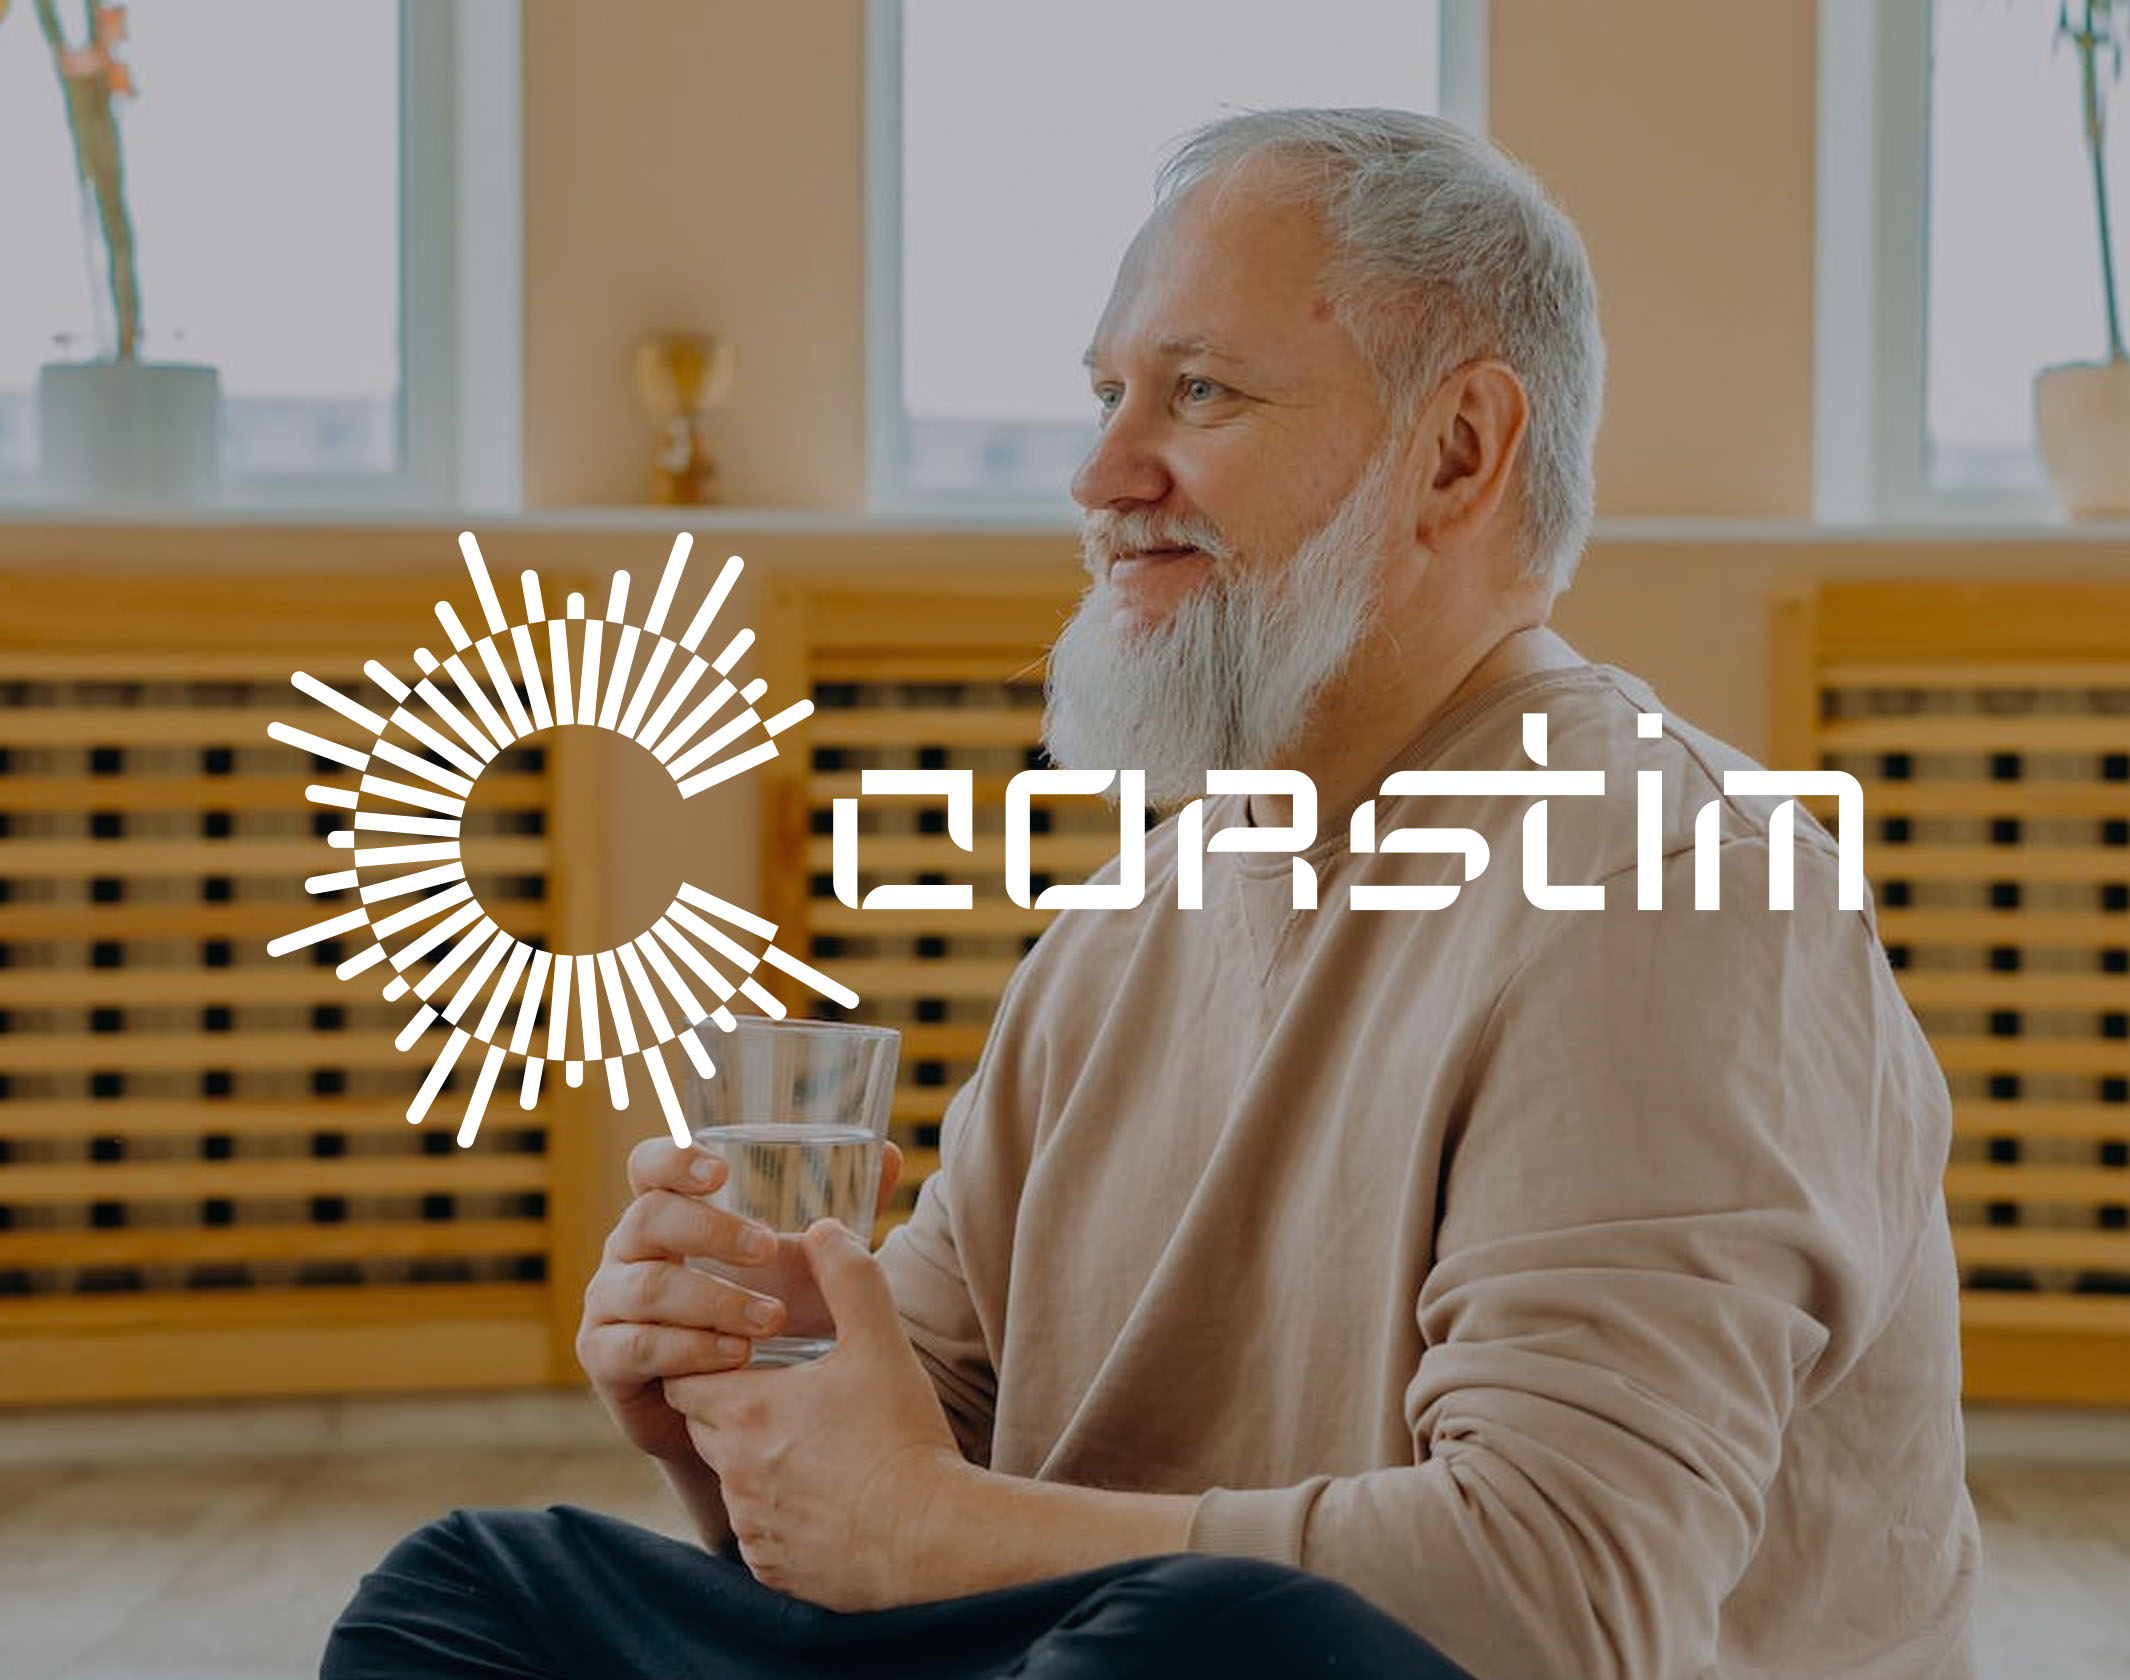 Palantis Transforms CorStim’s Brand Identity: A Vision for Mapping Minds and Correcting Brain Disorders